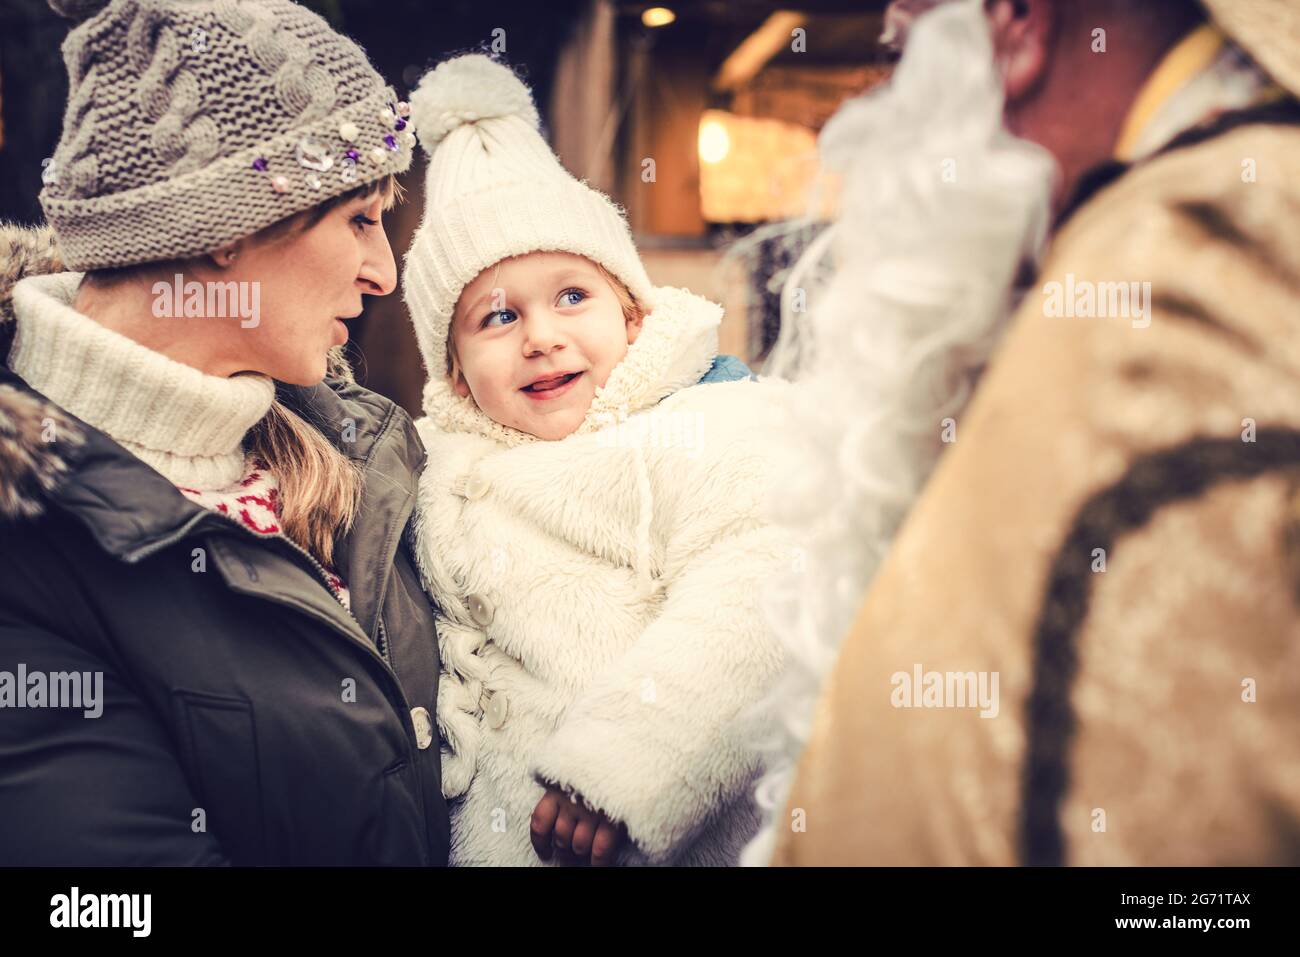 Little girl child meeting St Nicholas at a Christmas market Stock Photo